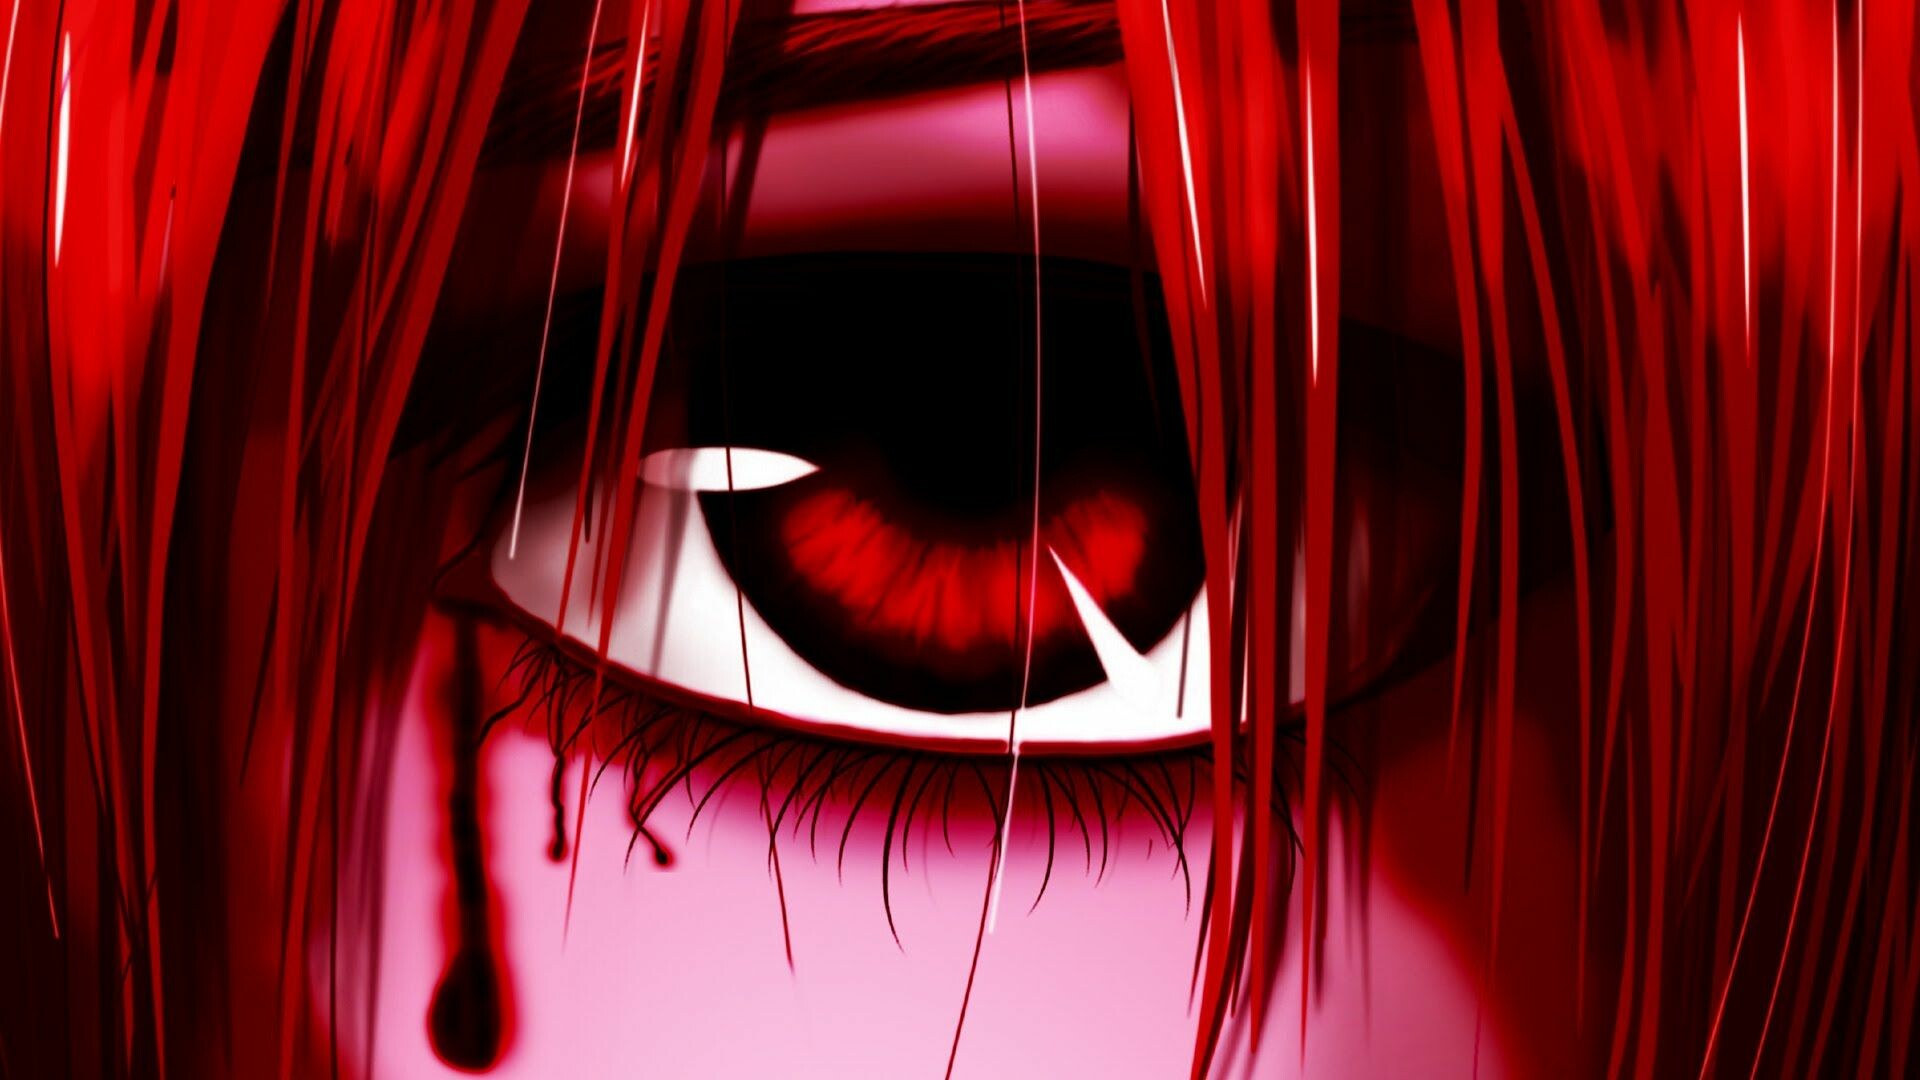 Anime Scary Face 4K Wallpapers